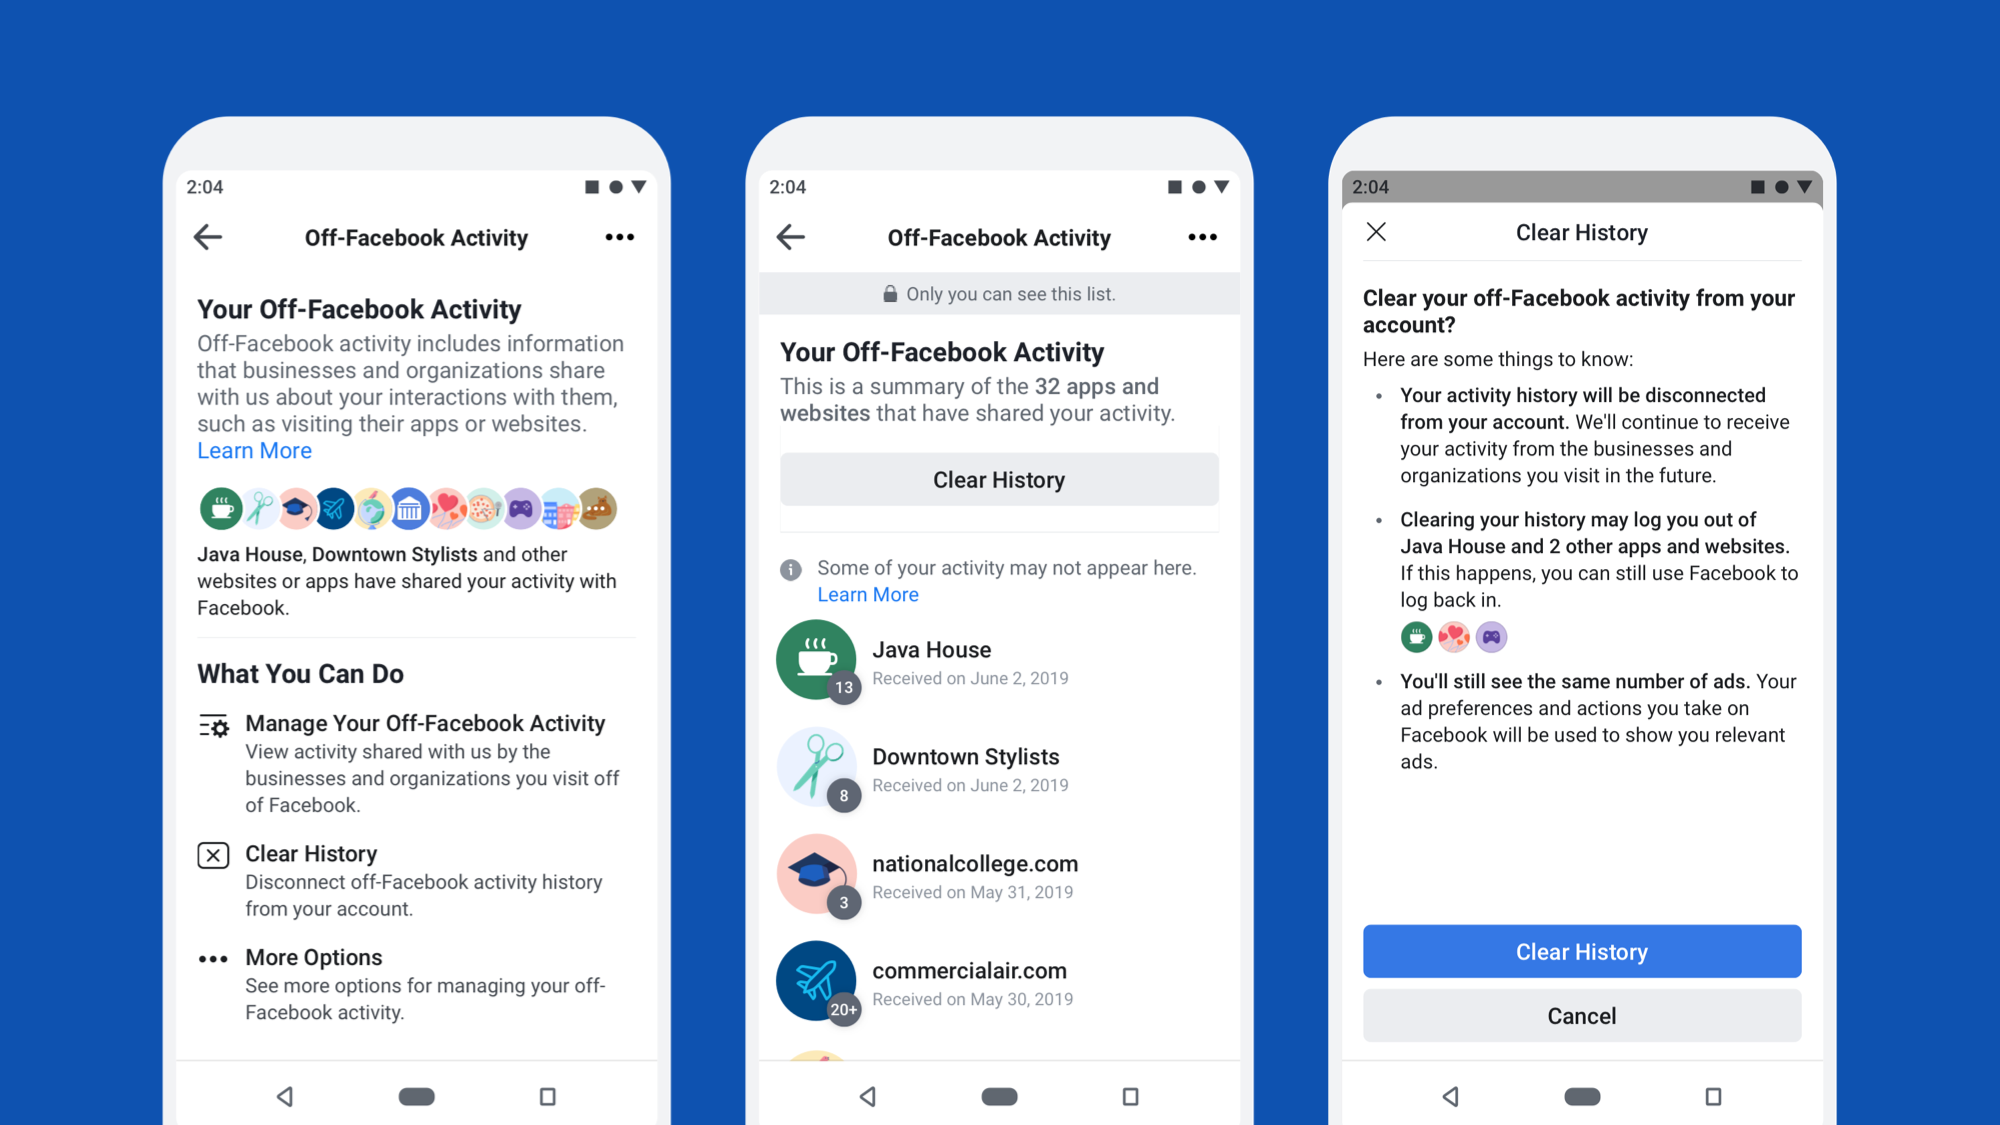 Redesigning our systems to provide more control over Off-Facebook Activity - Facebook Clear History